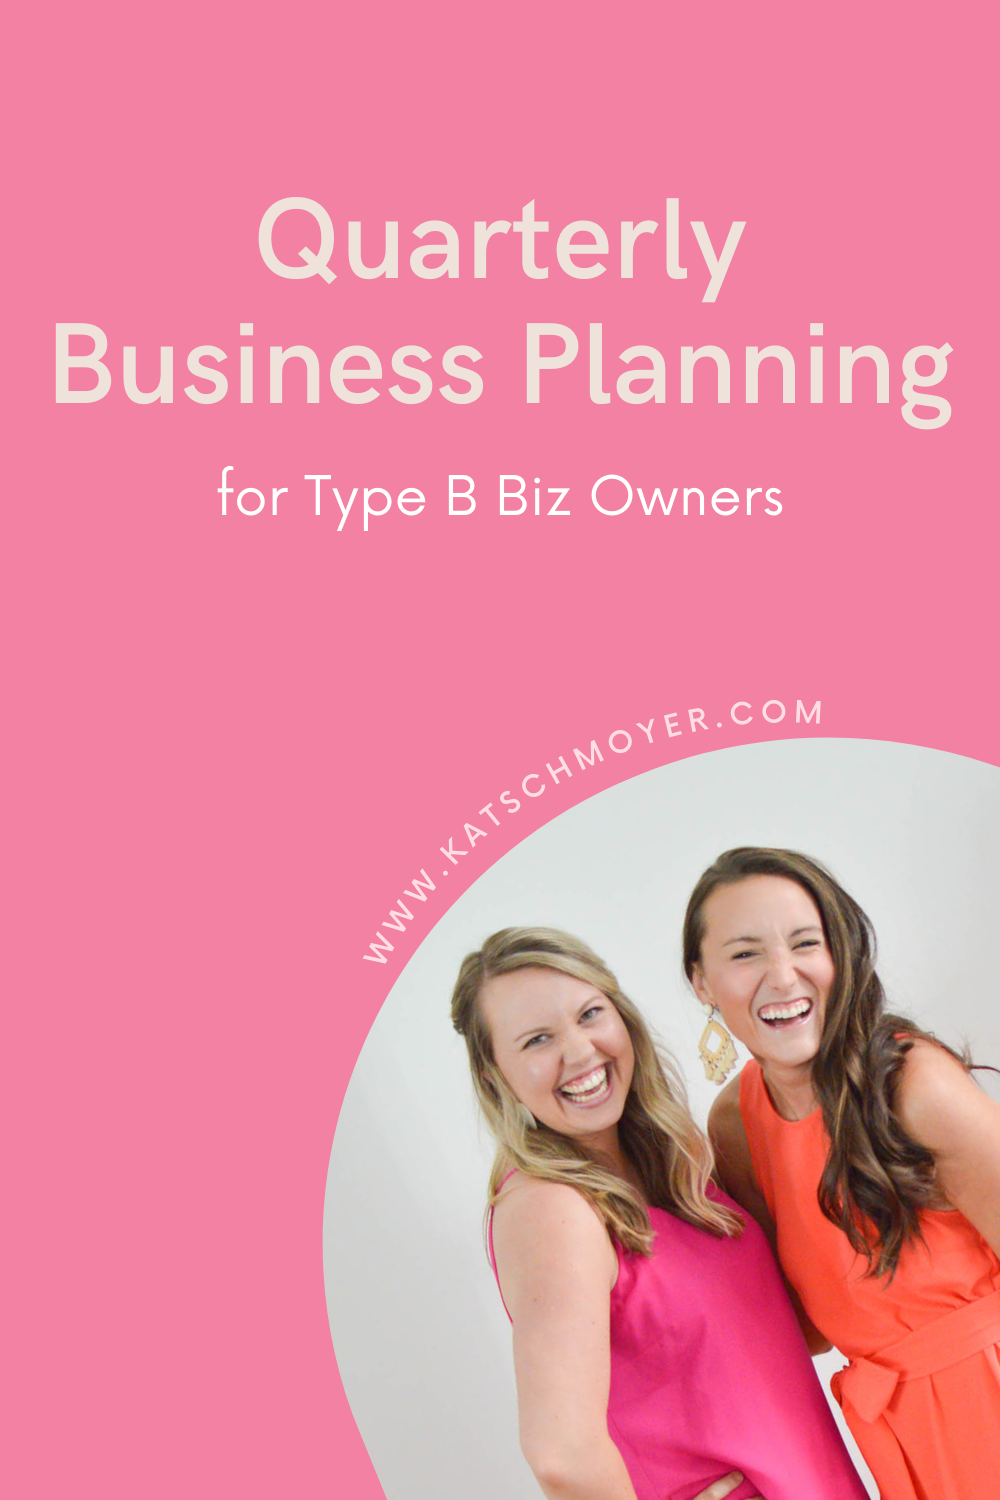 Tips for quarterly planning as a Type B business owner